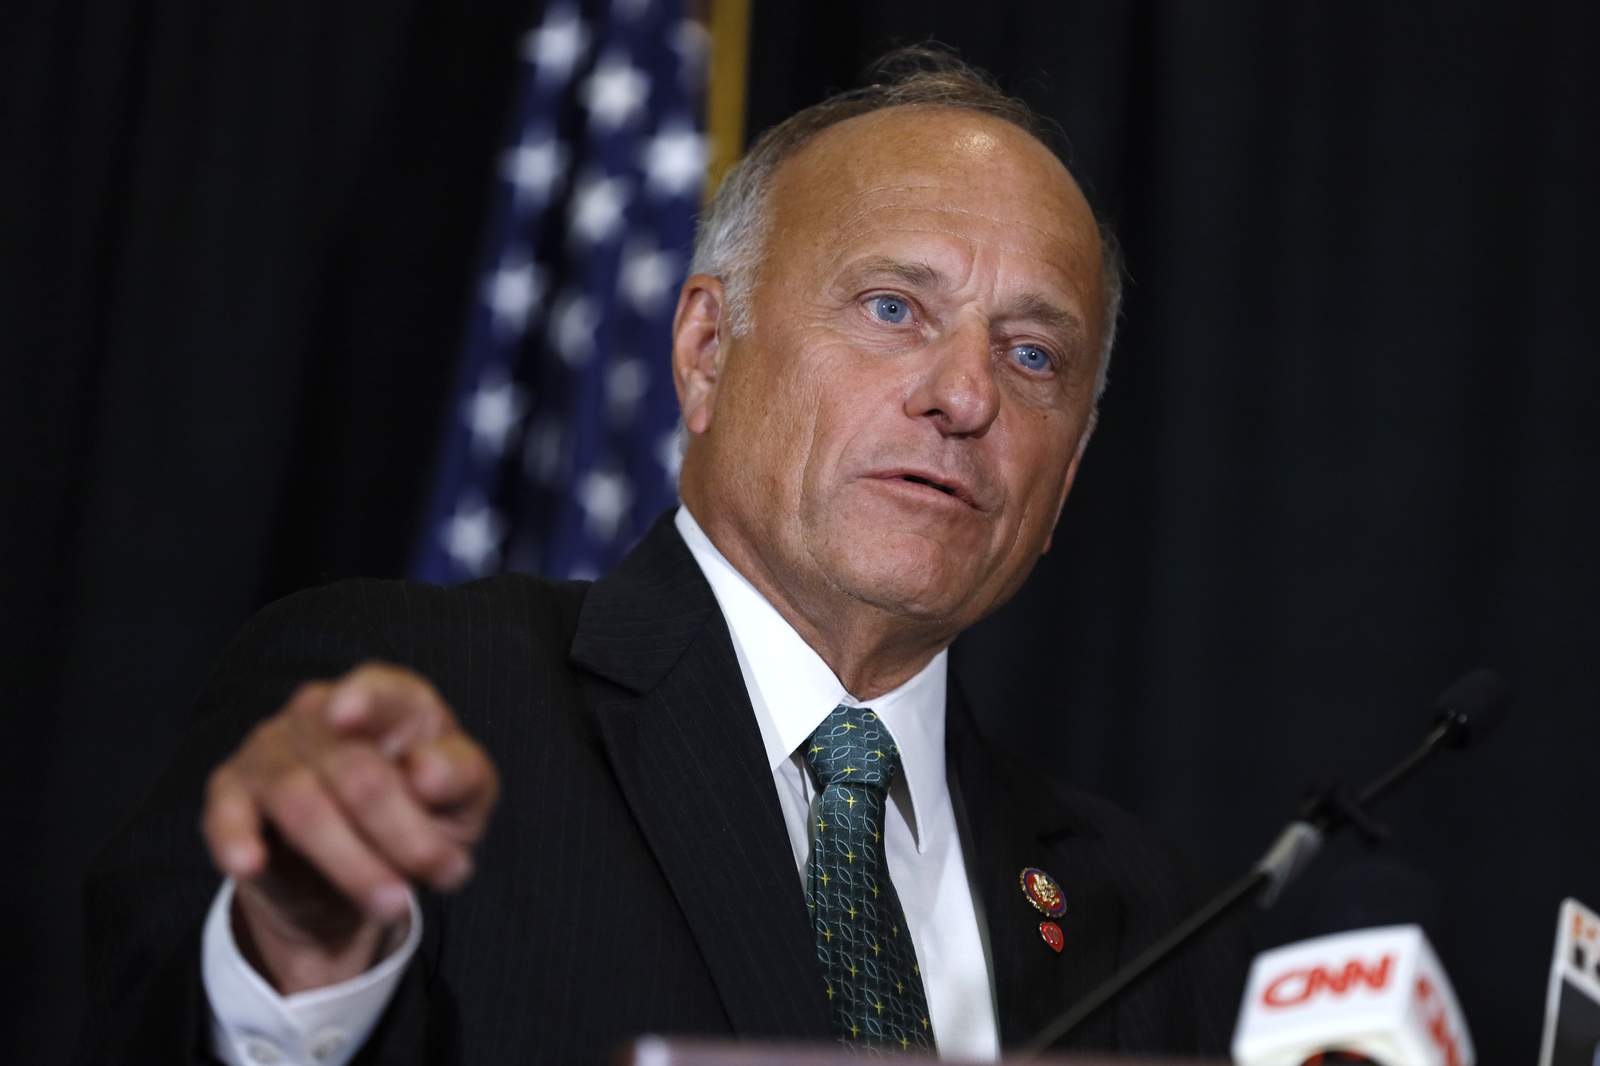 Shunned by his party, Iowa's Steve King fights for his seat